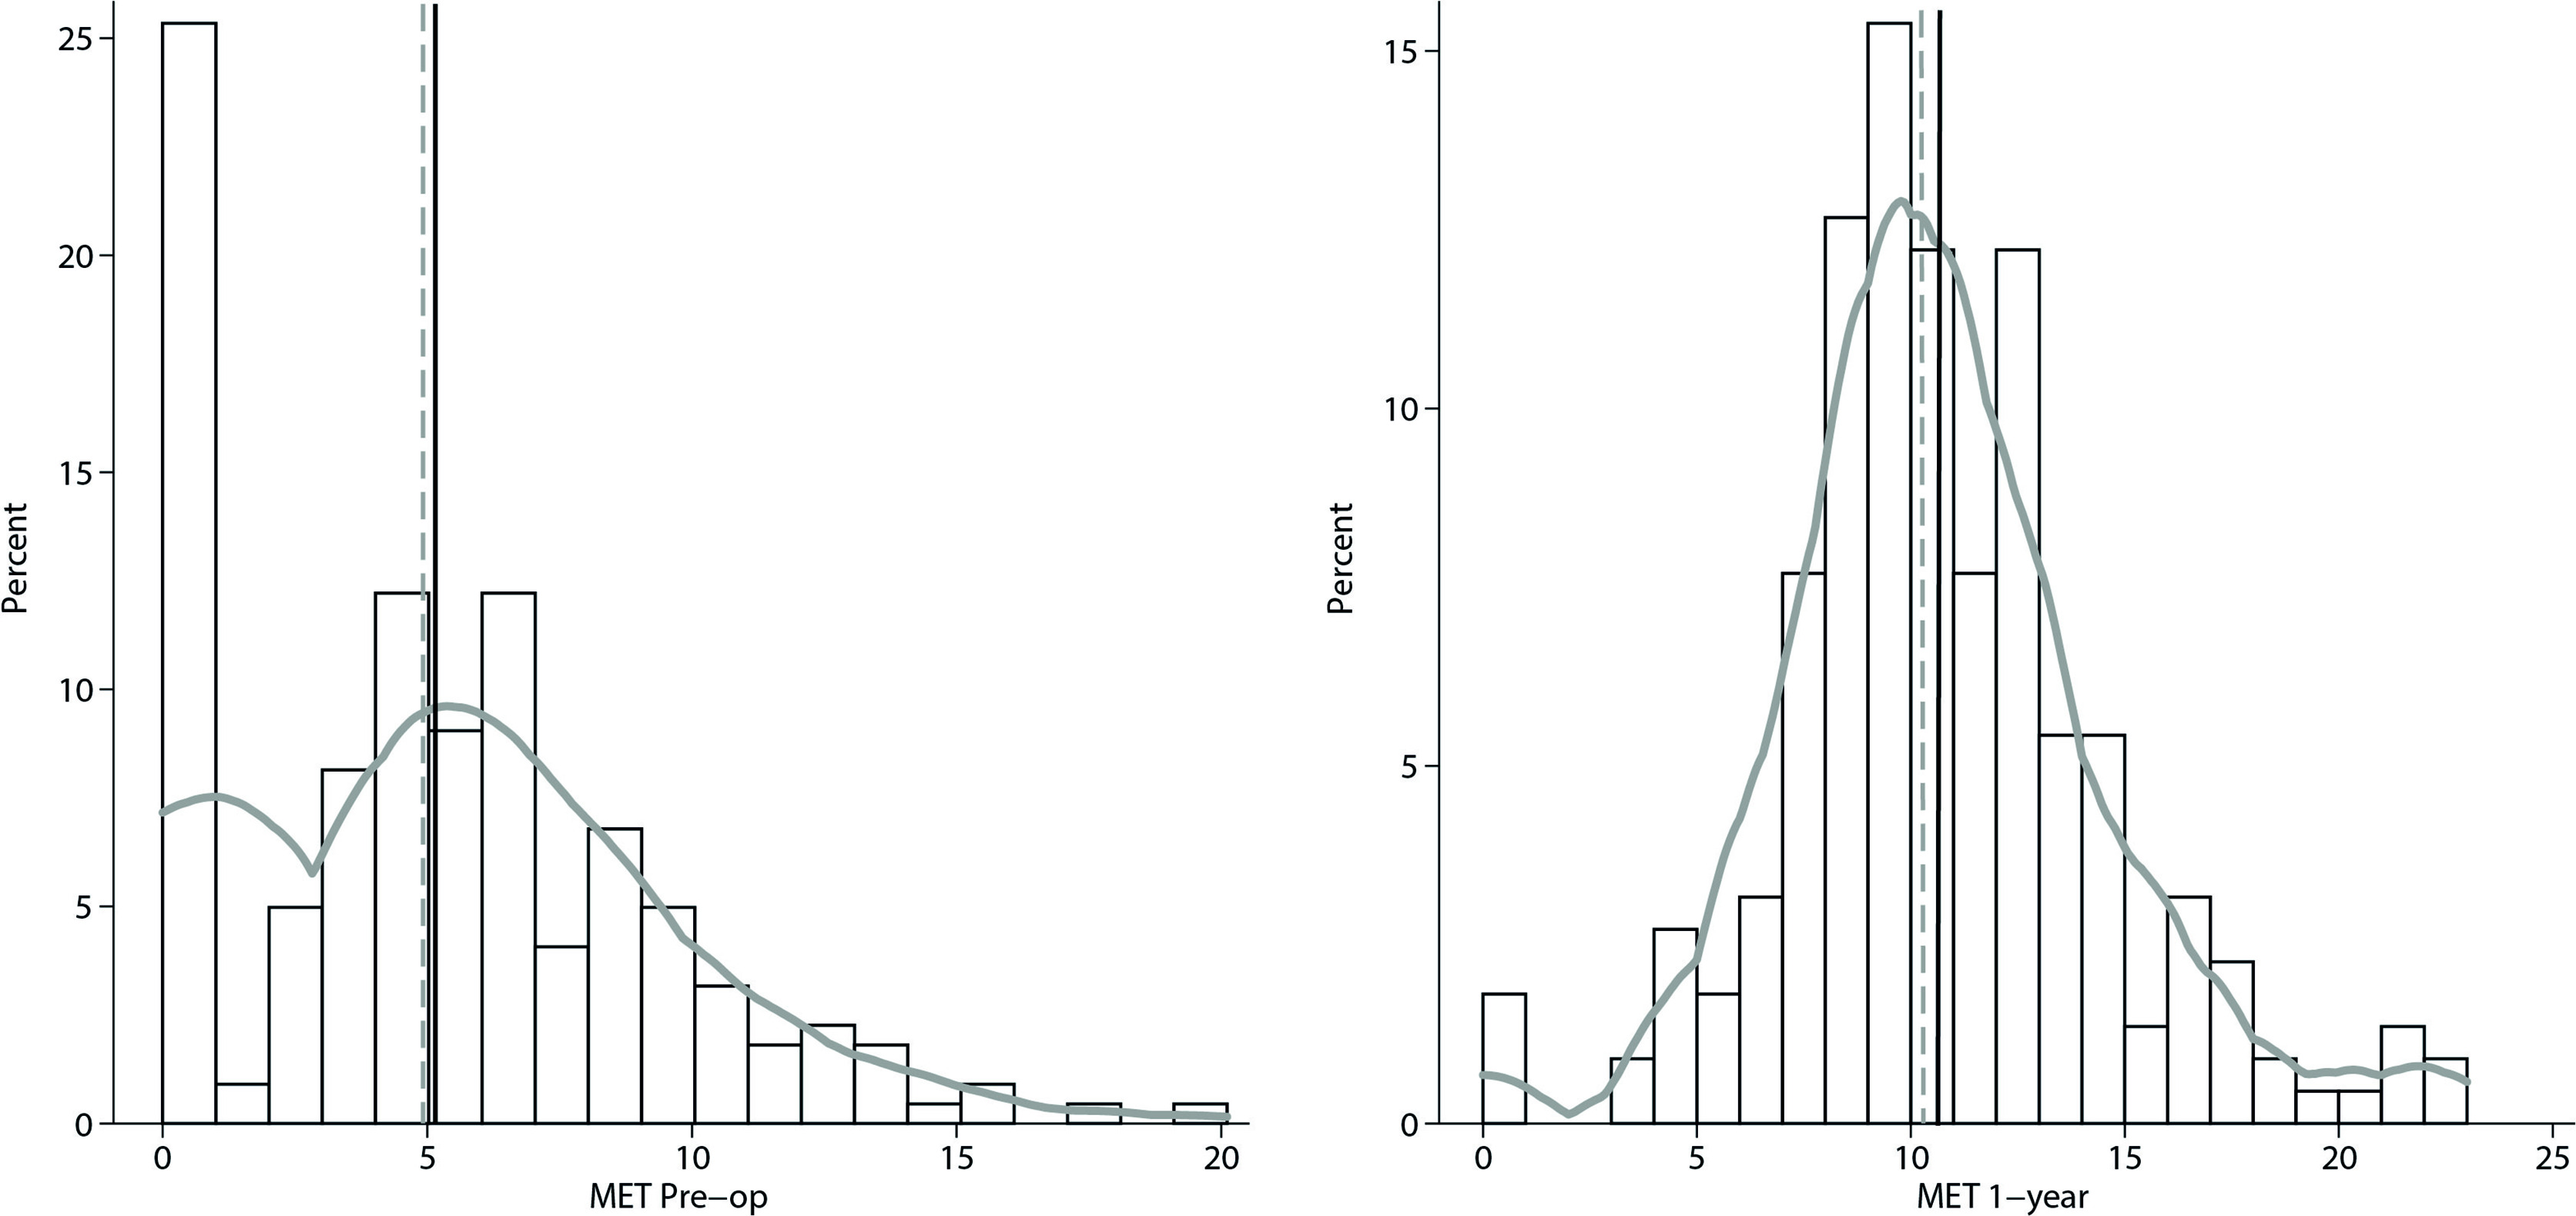 Fig. 3 
            Histograms with kernel (Epanechnikov) density plots demonstrating distribution of metabolic equivalent of task (MET) scores preoperatively and at one-year follow-up. Solid vertical lines represent mean values, dashed vertical lines represent the median.
          